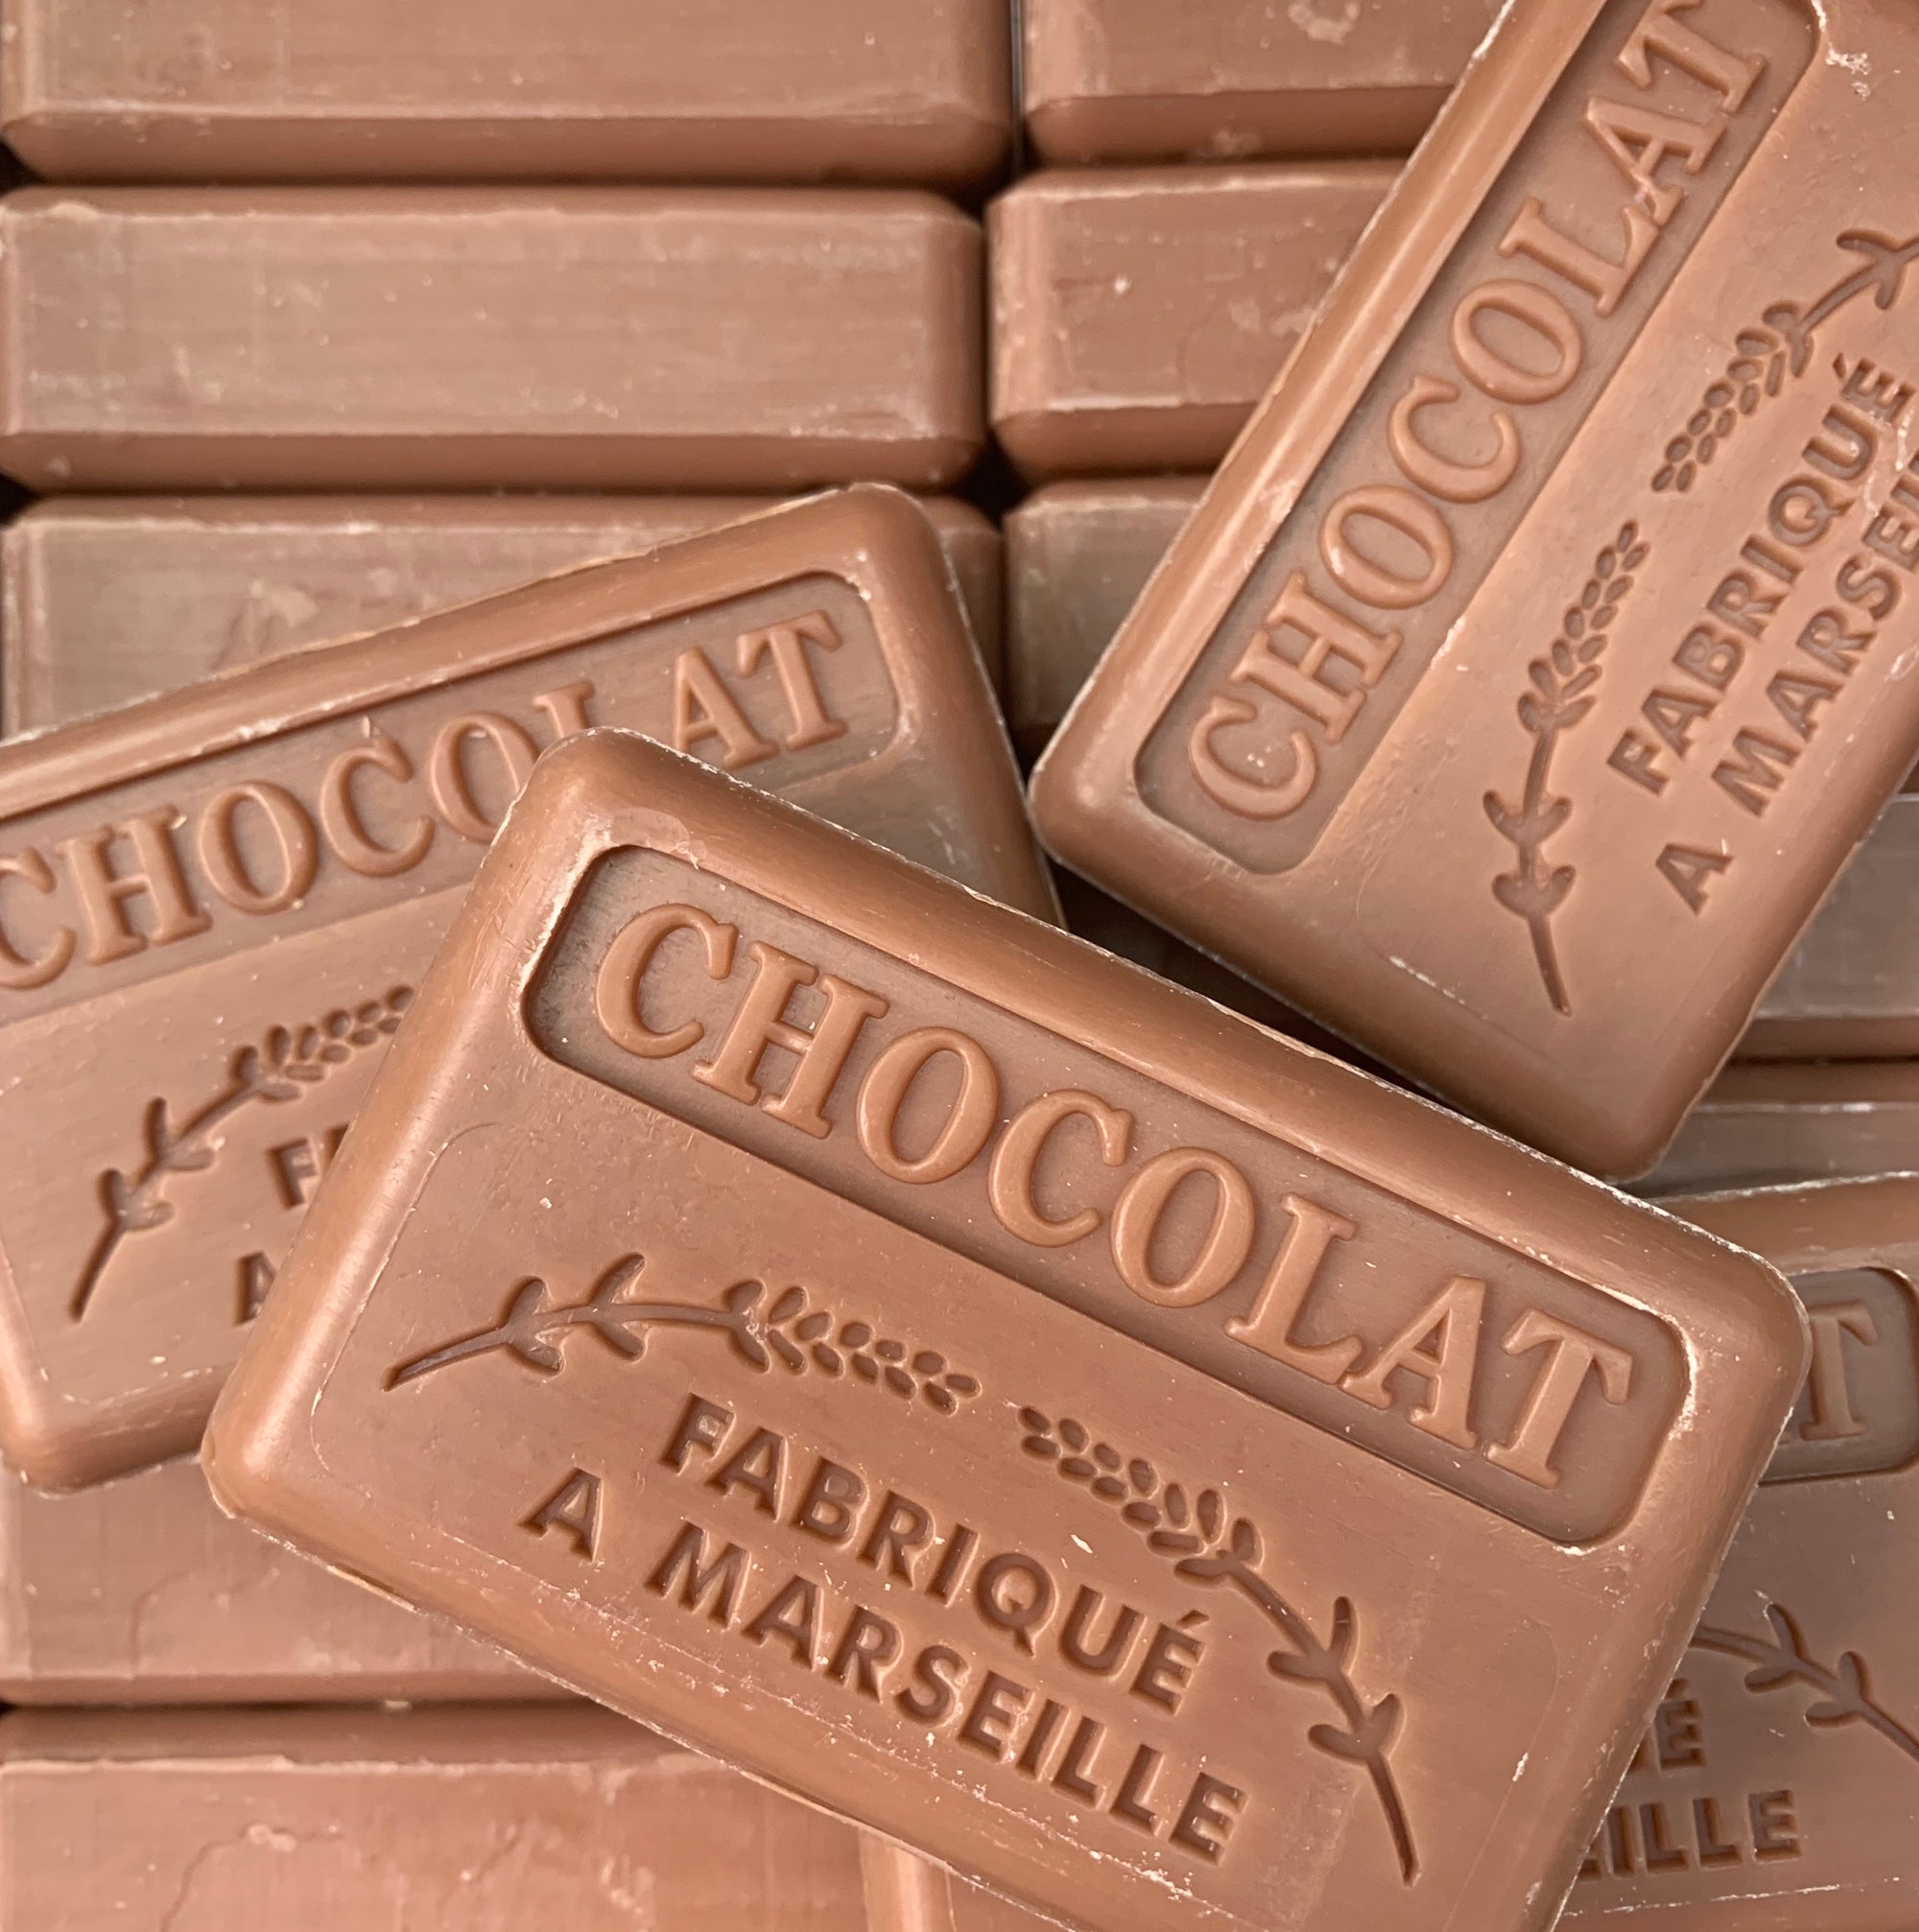 chocolate french soap marseille